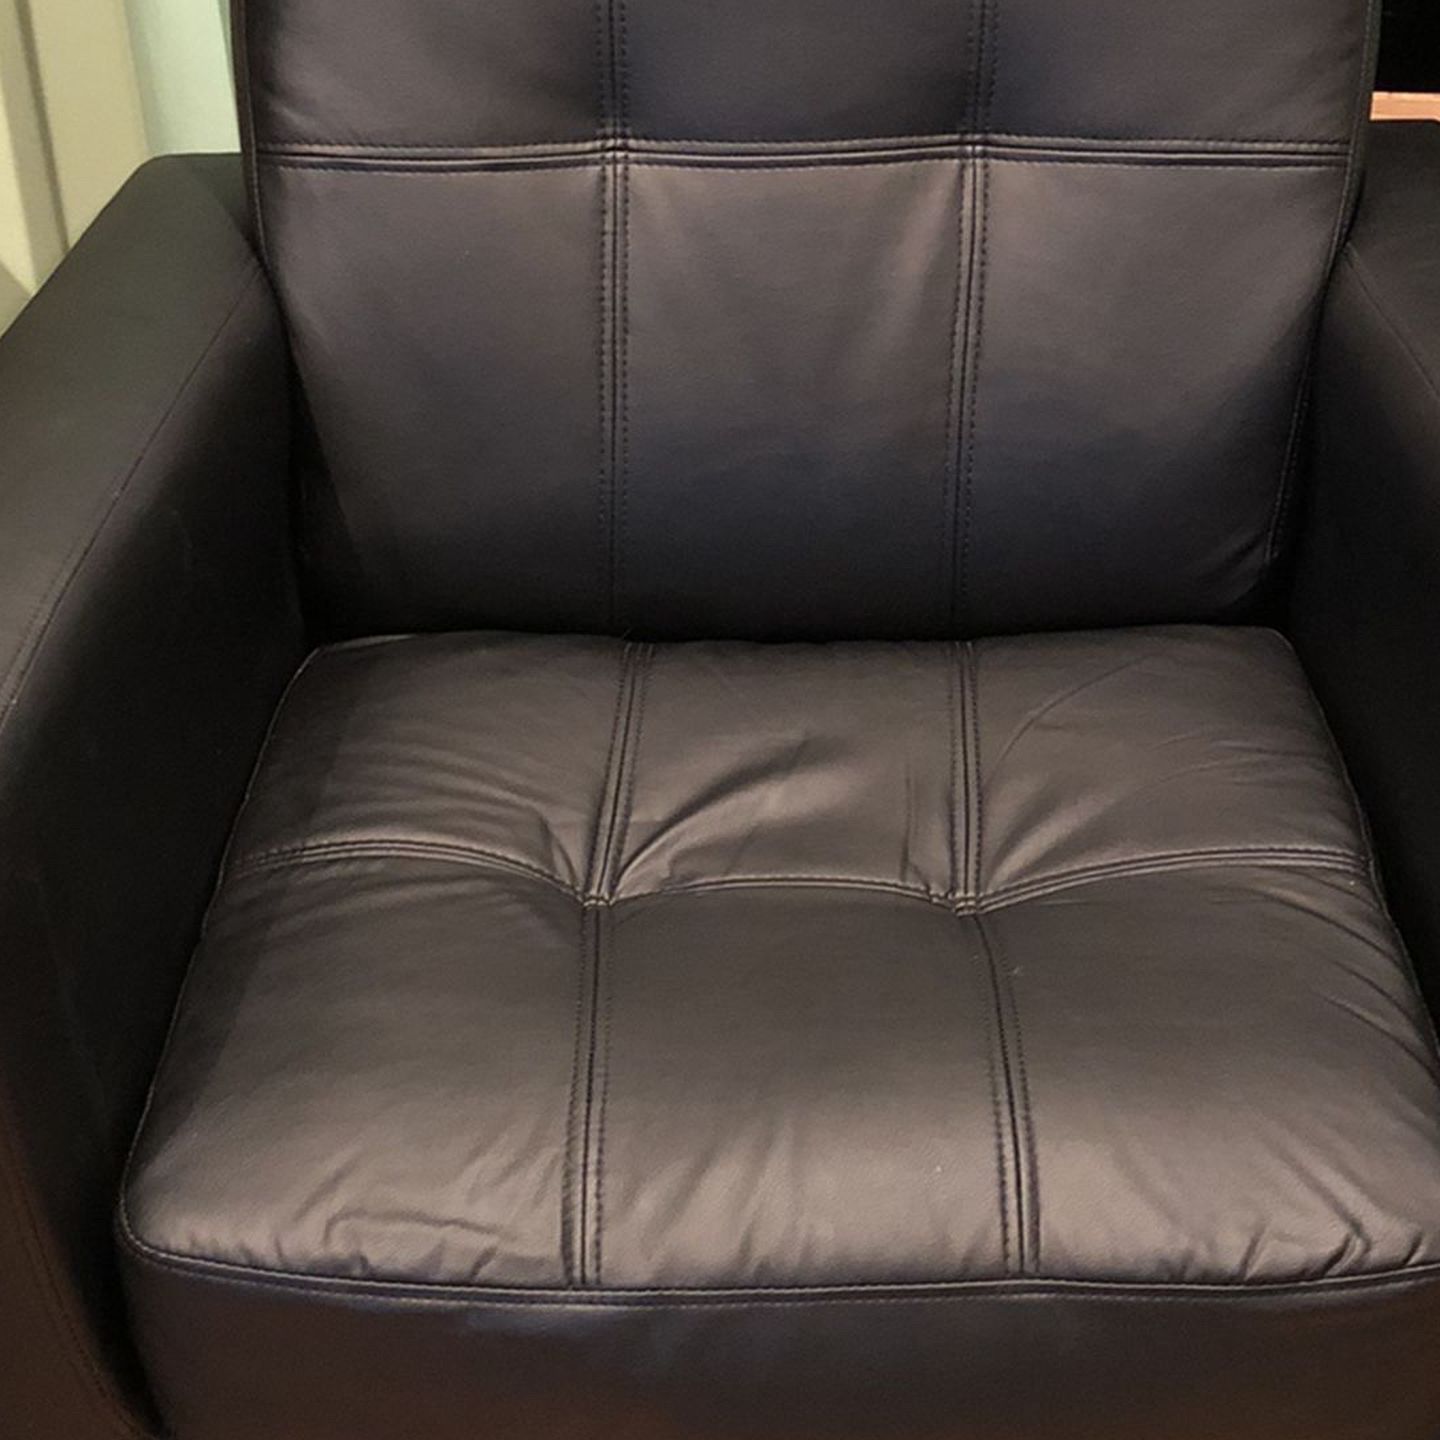 Coaster Charcoal Gray Accent Chair